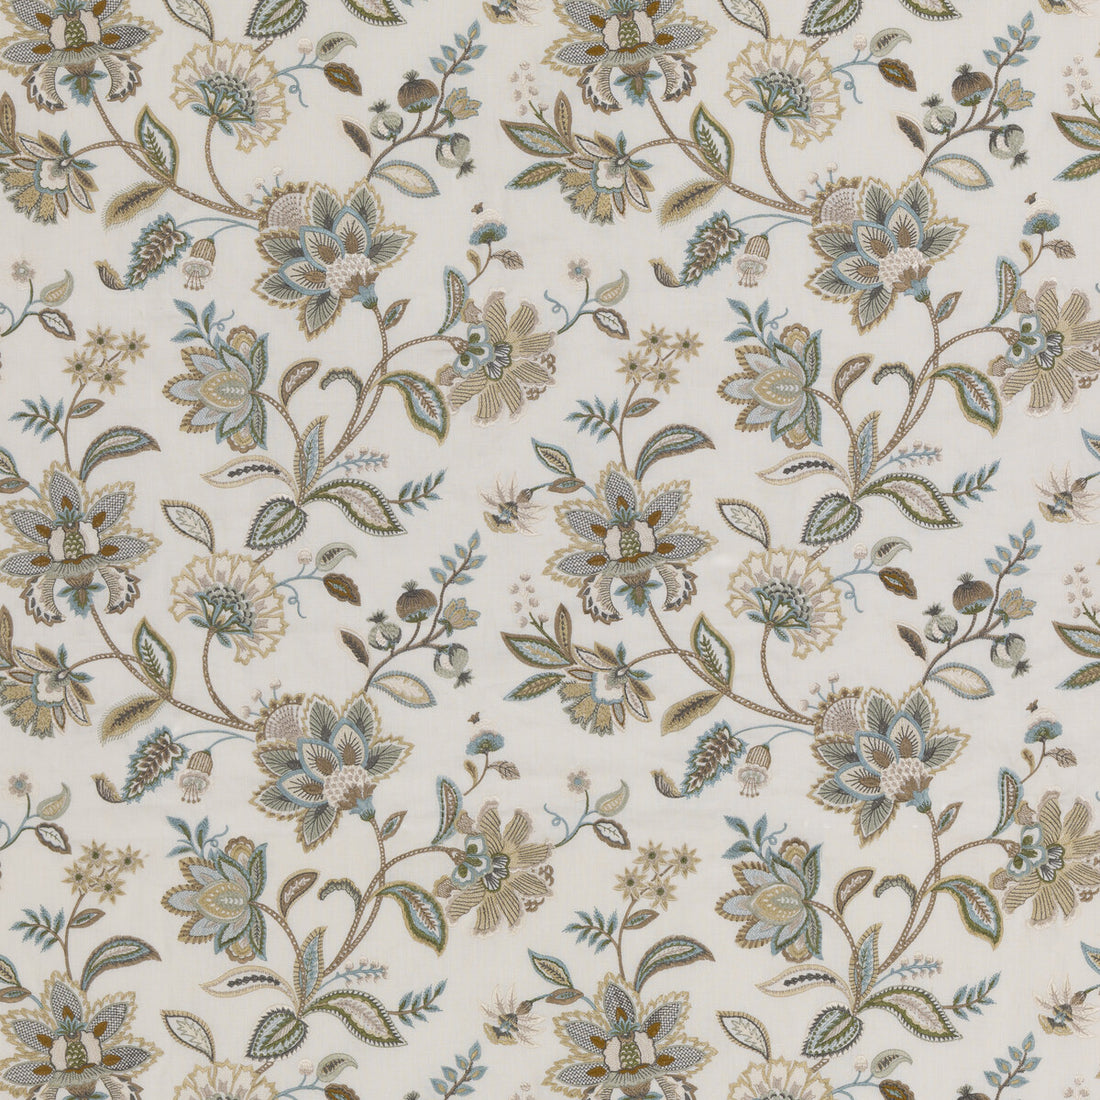 Langley fabric in aqua color - pattern BF11028.2.0 - by G P &amp; J Baker in the Burford collection